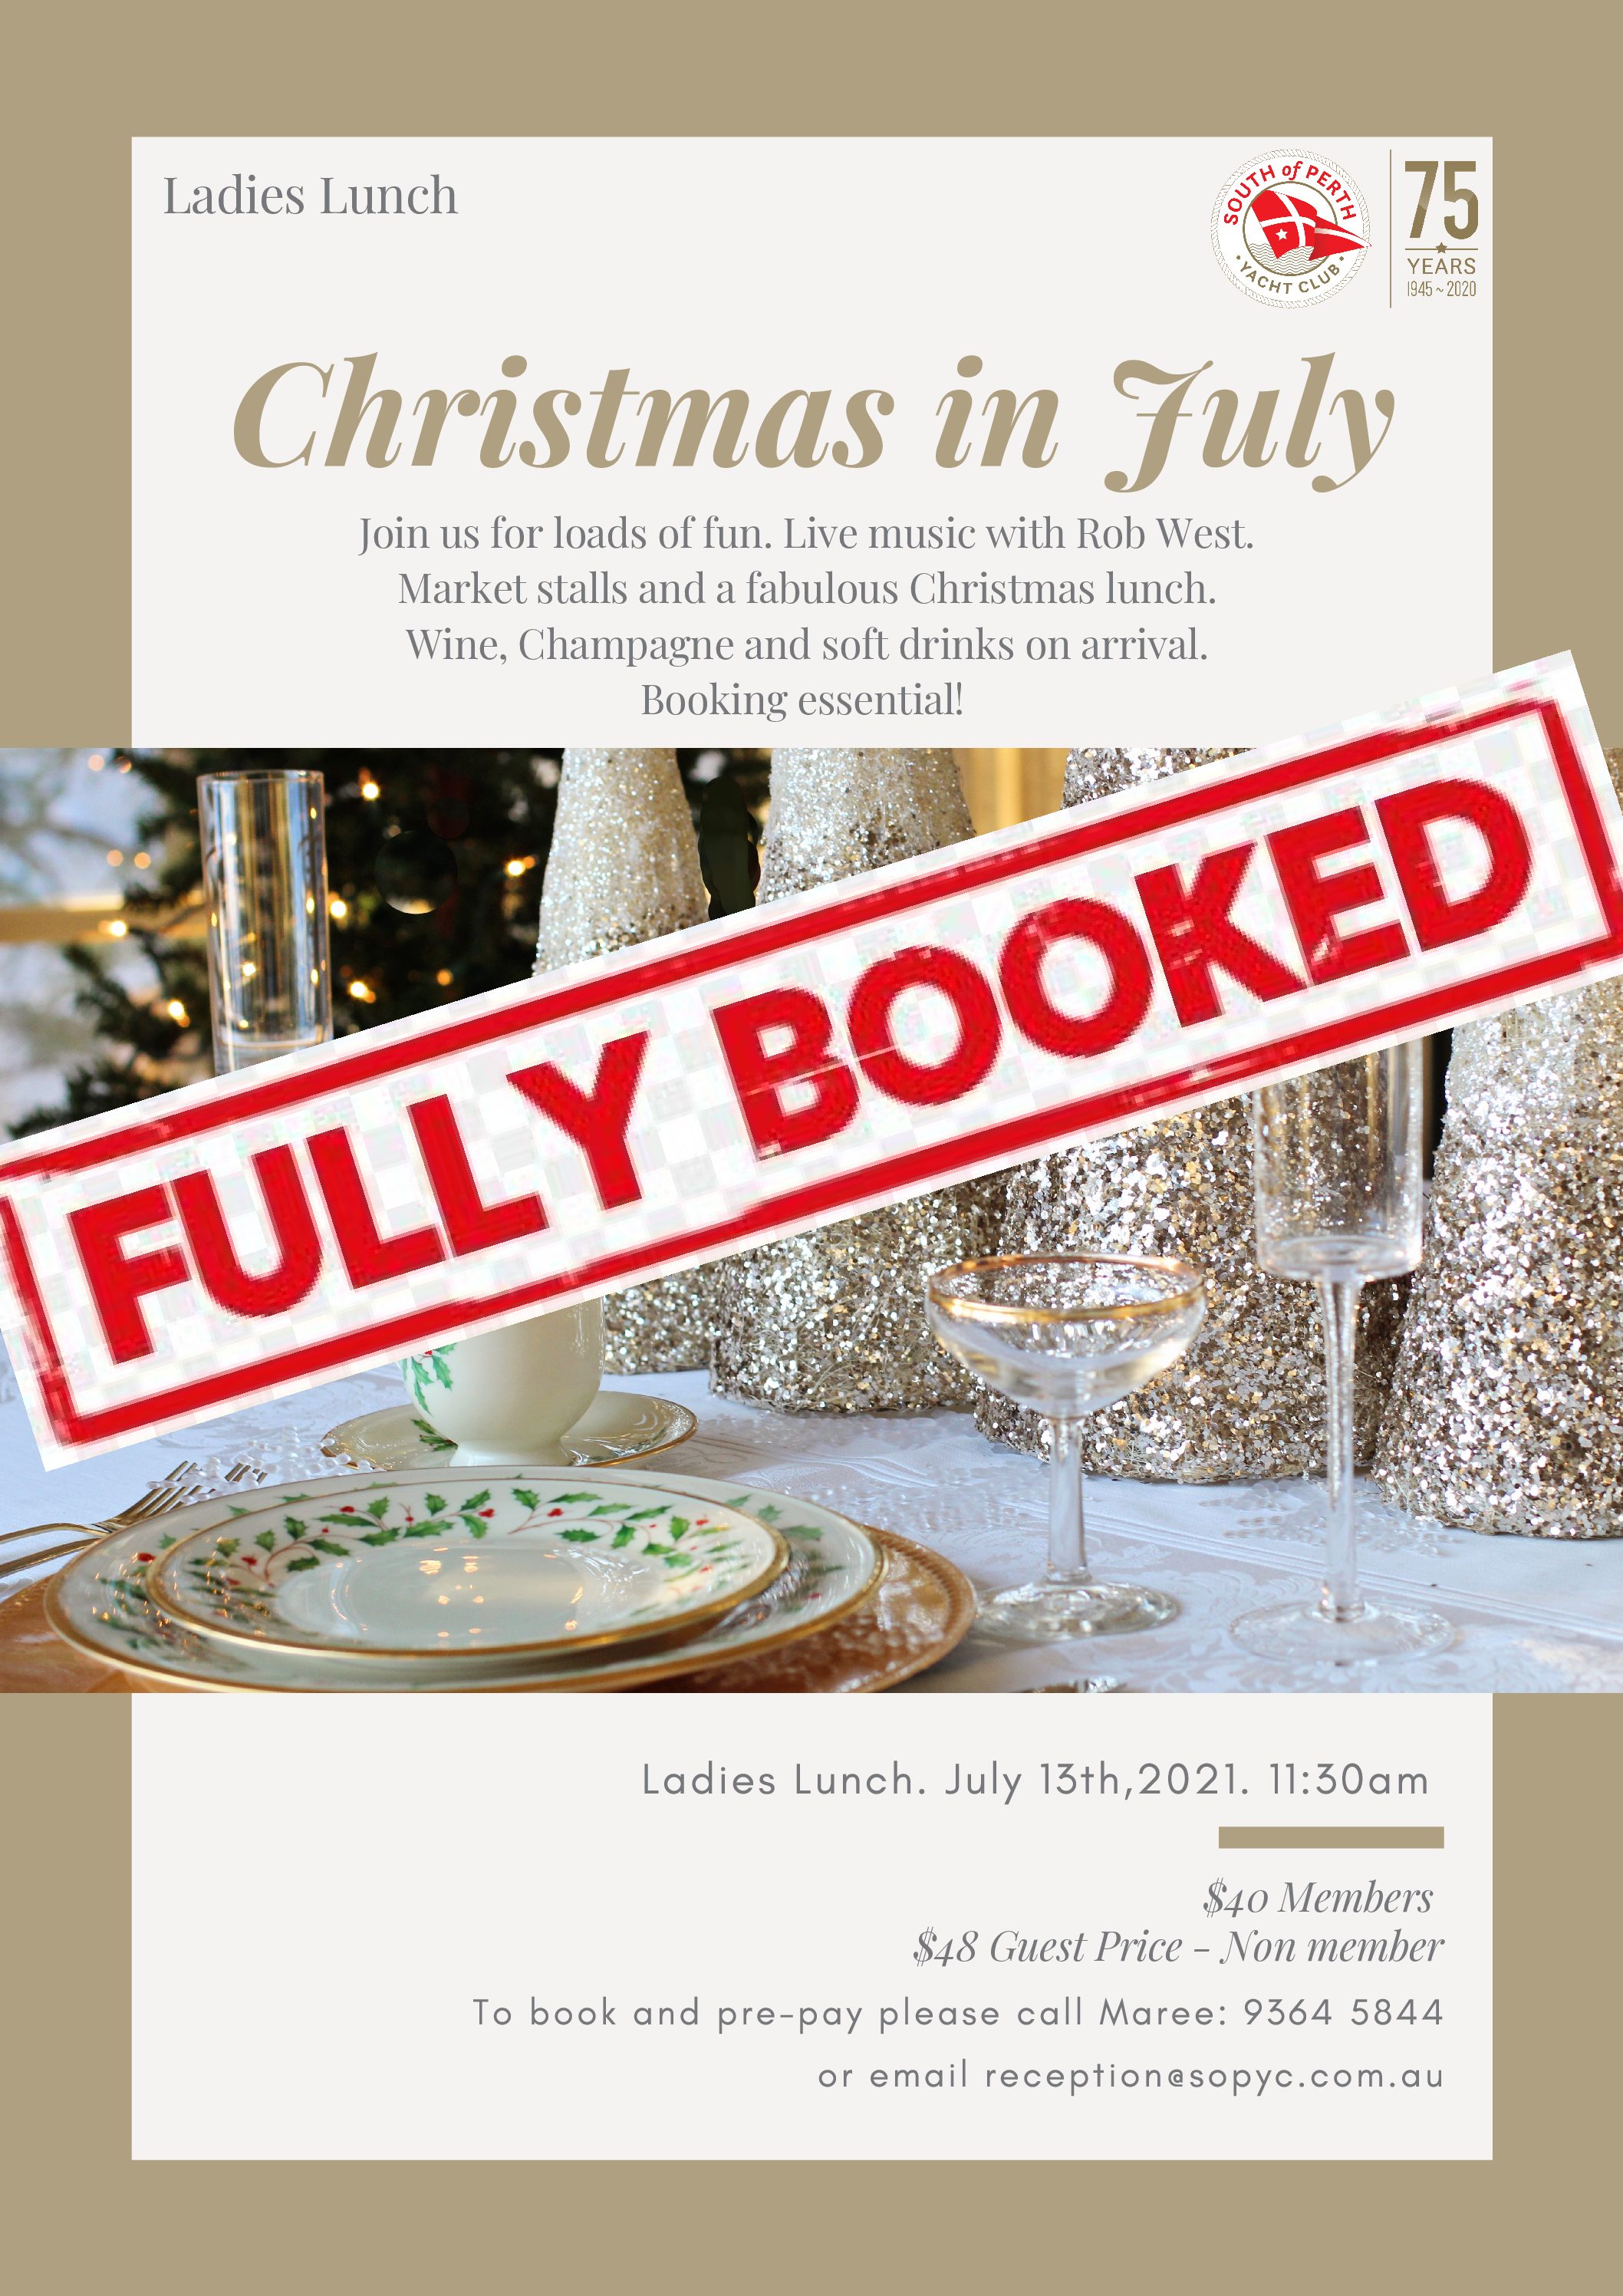 Ladies Lunch - Christmas in July FULLY BOOKED